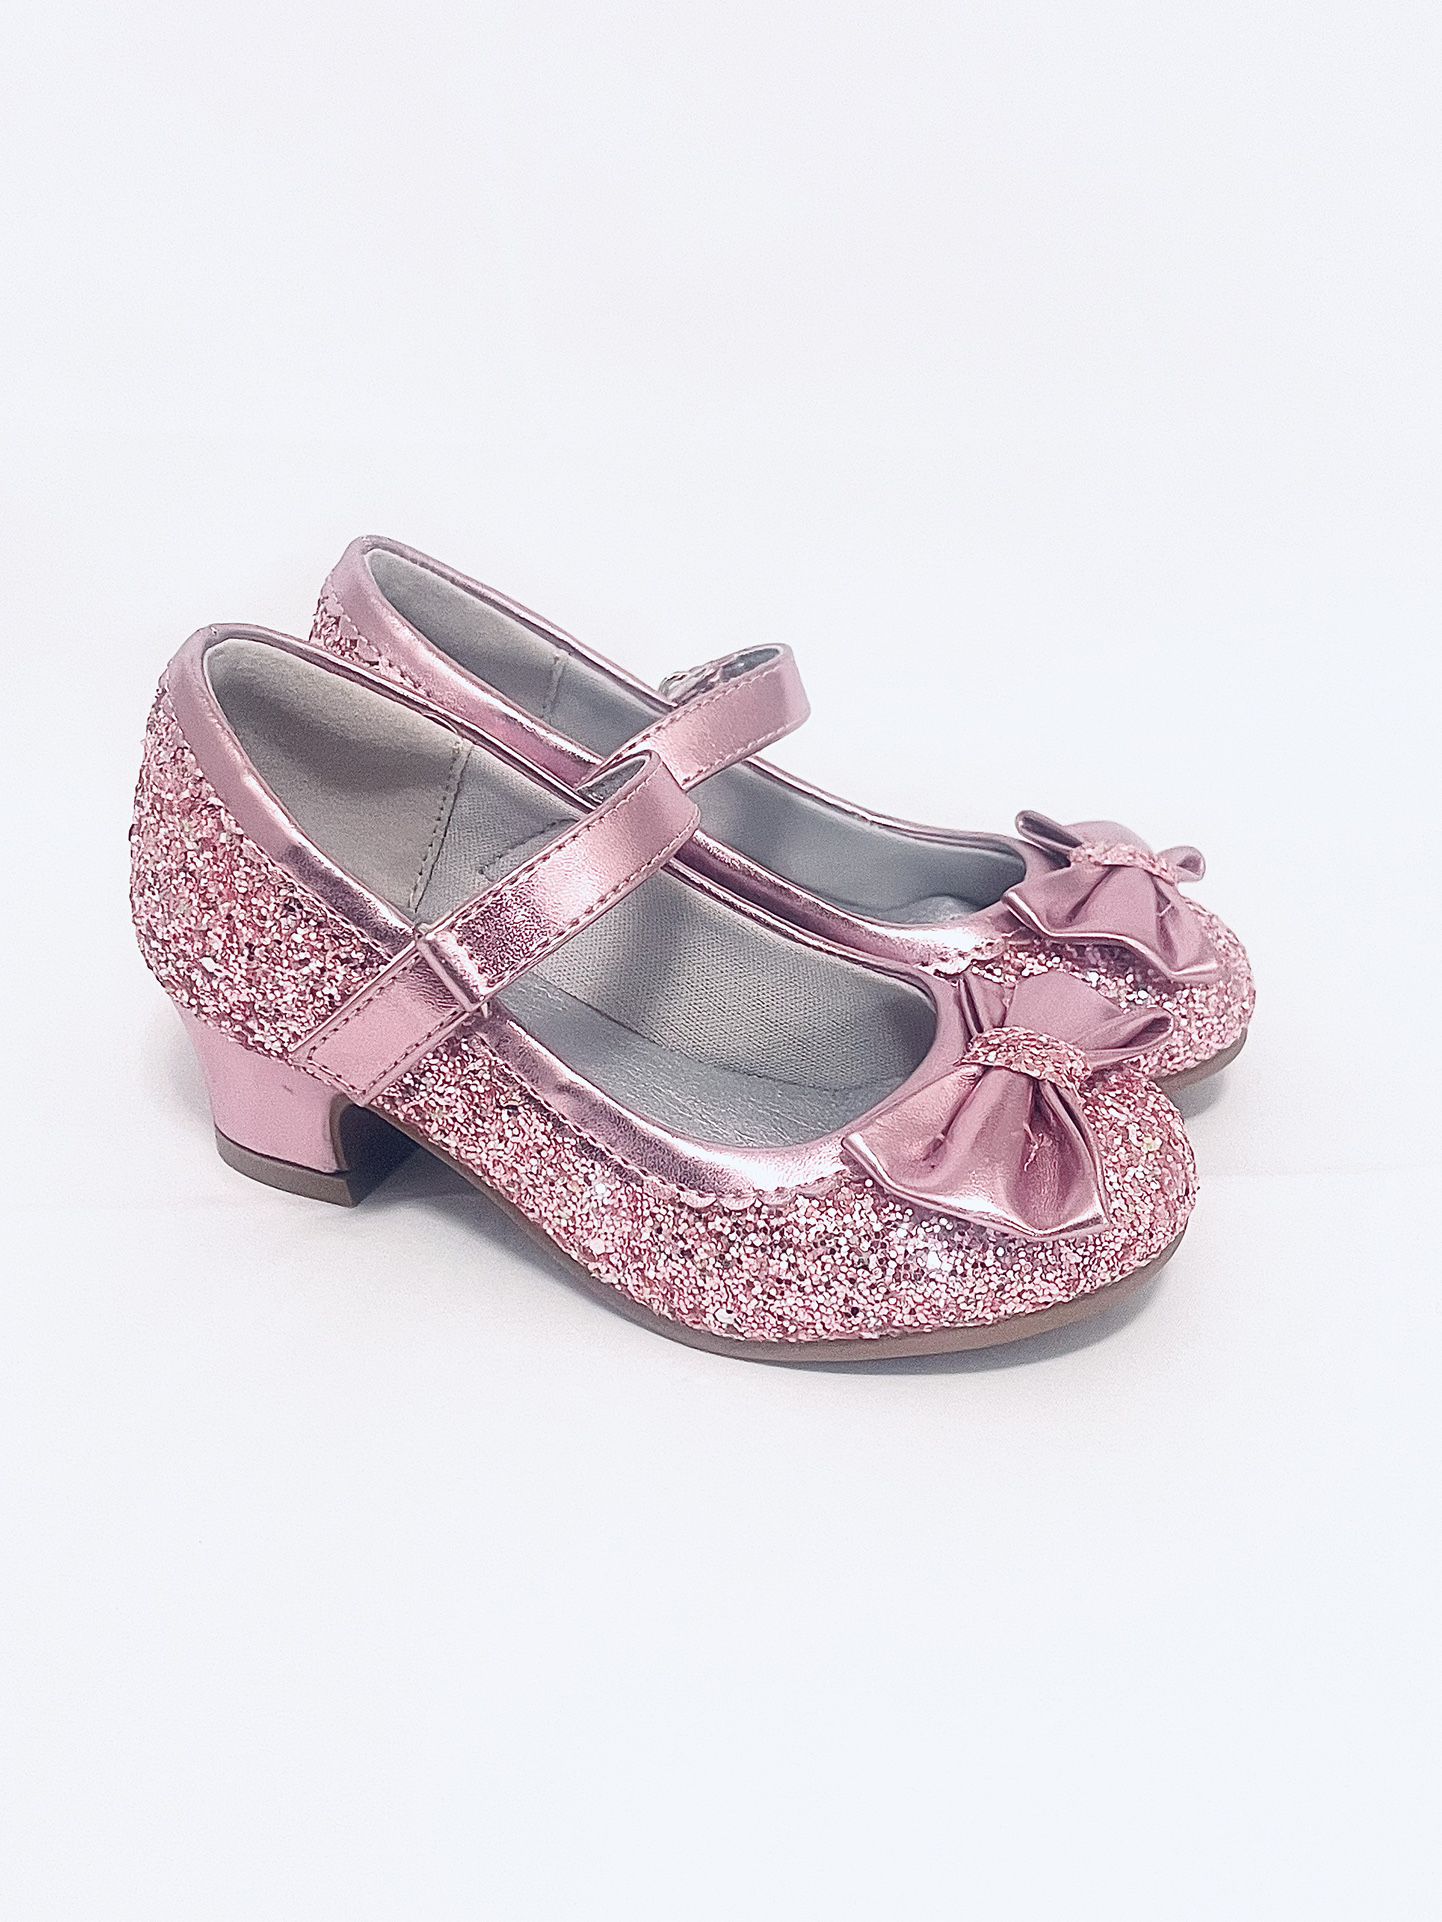 Girl's Glitter Shoes 1.5in Low Heel Wedding Party Princess Shoes Size 6